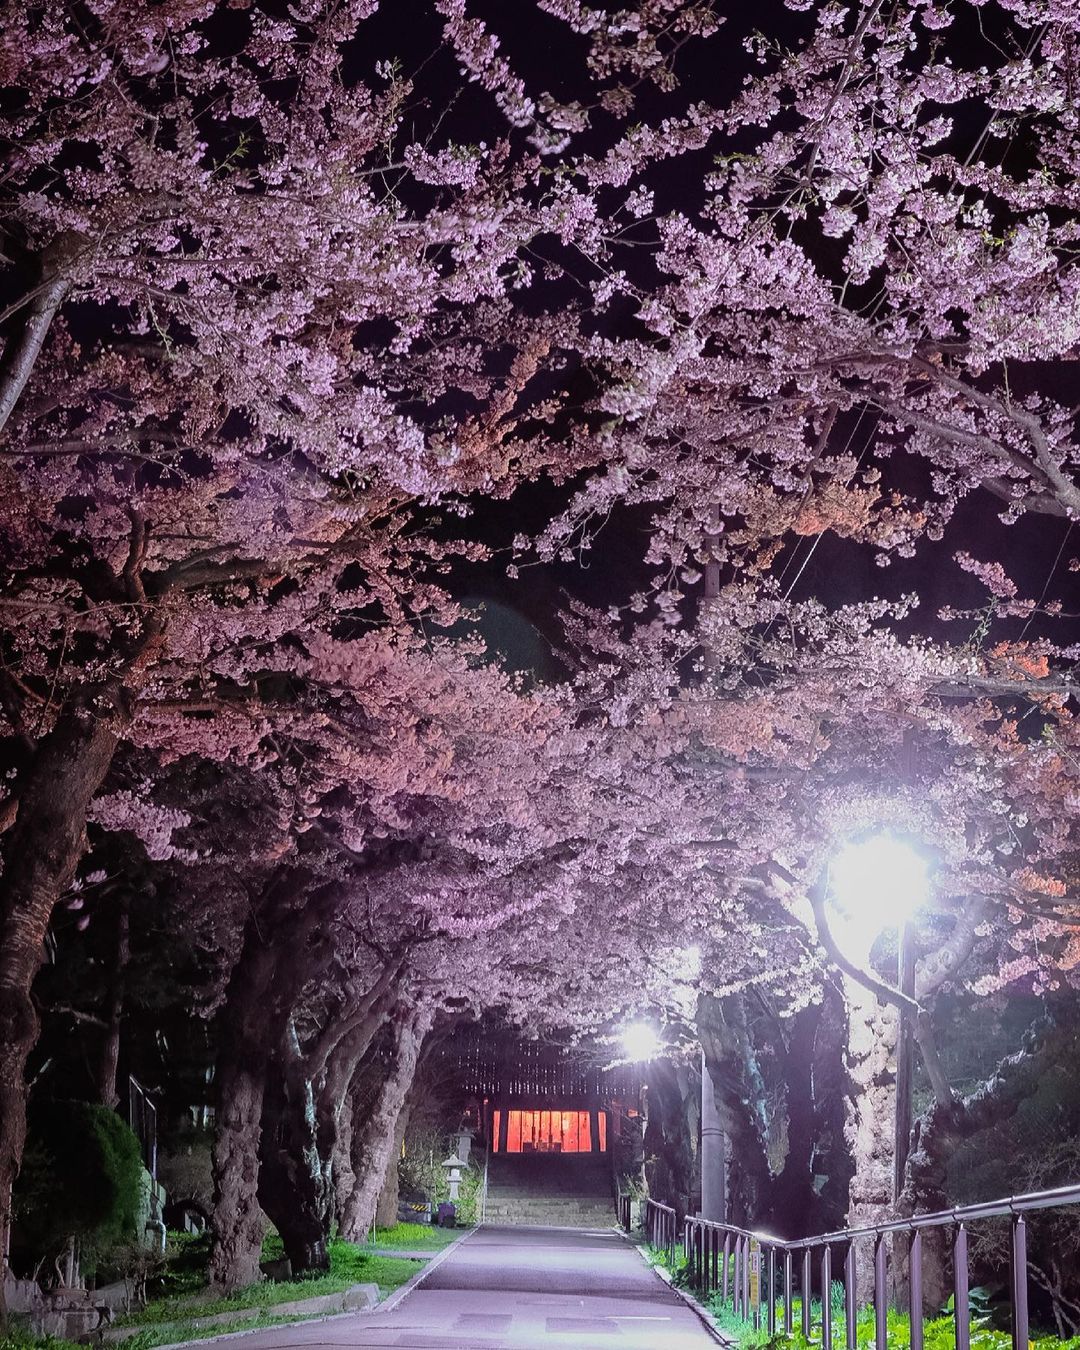 Cherry blossoms at night in full bloom (Hakodate)